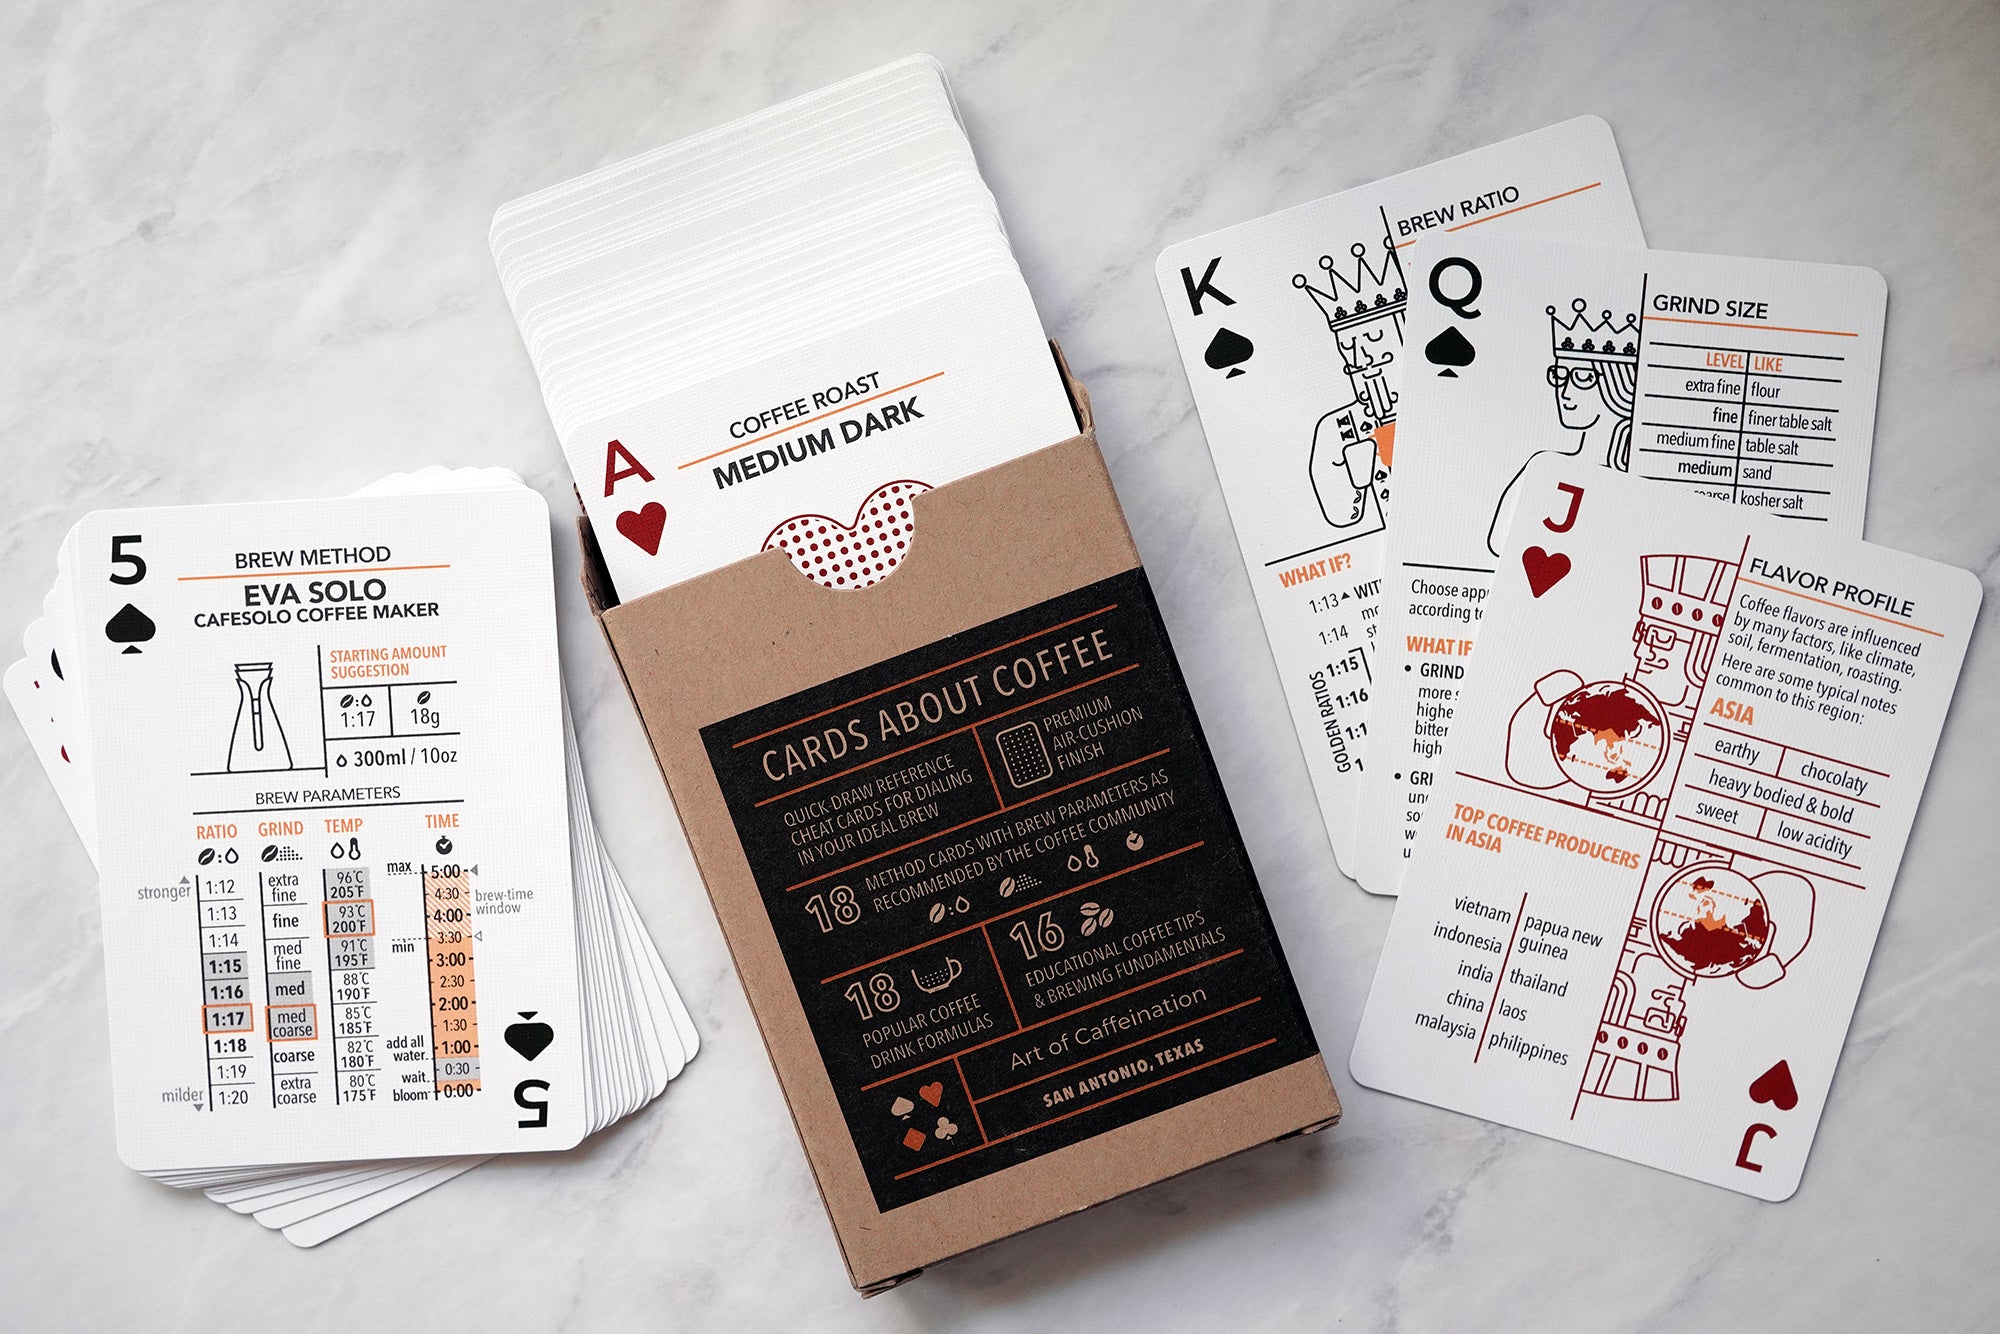 SIP-TO-SUIT Cards About Coffee - Standard Edition - Informational playing cards